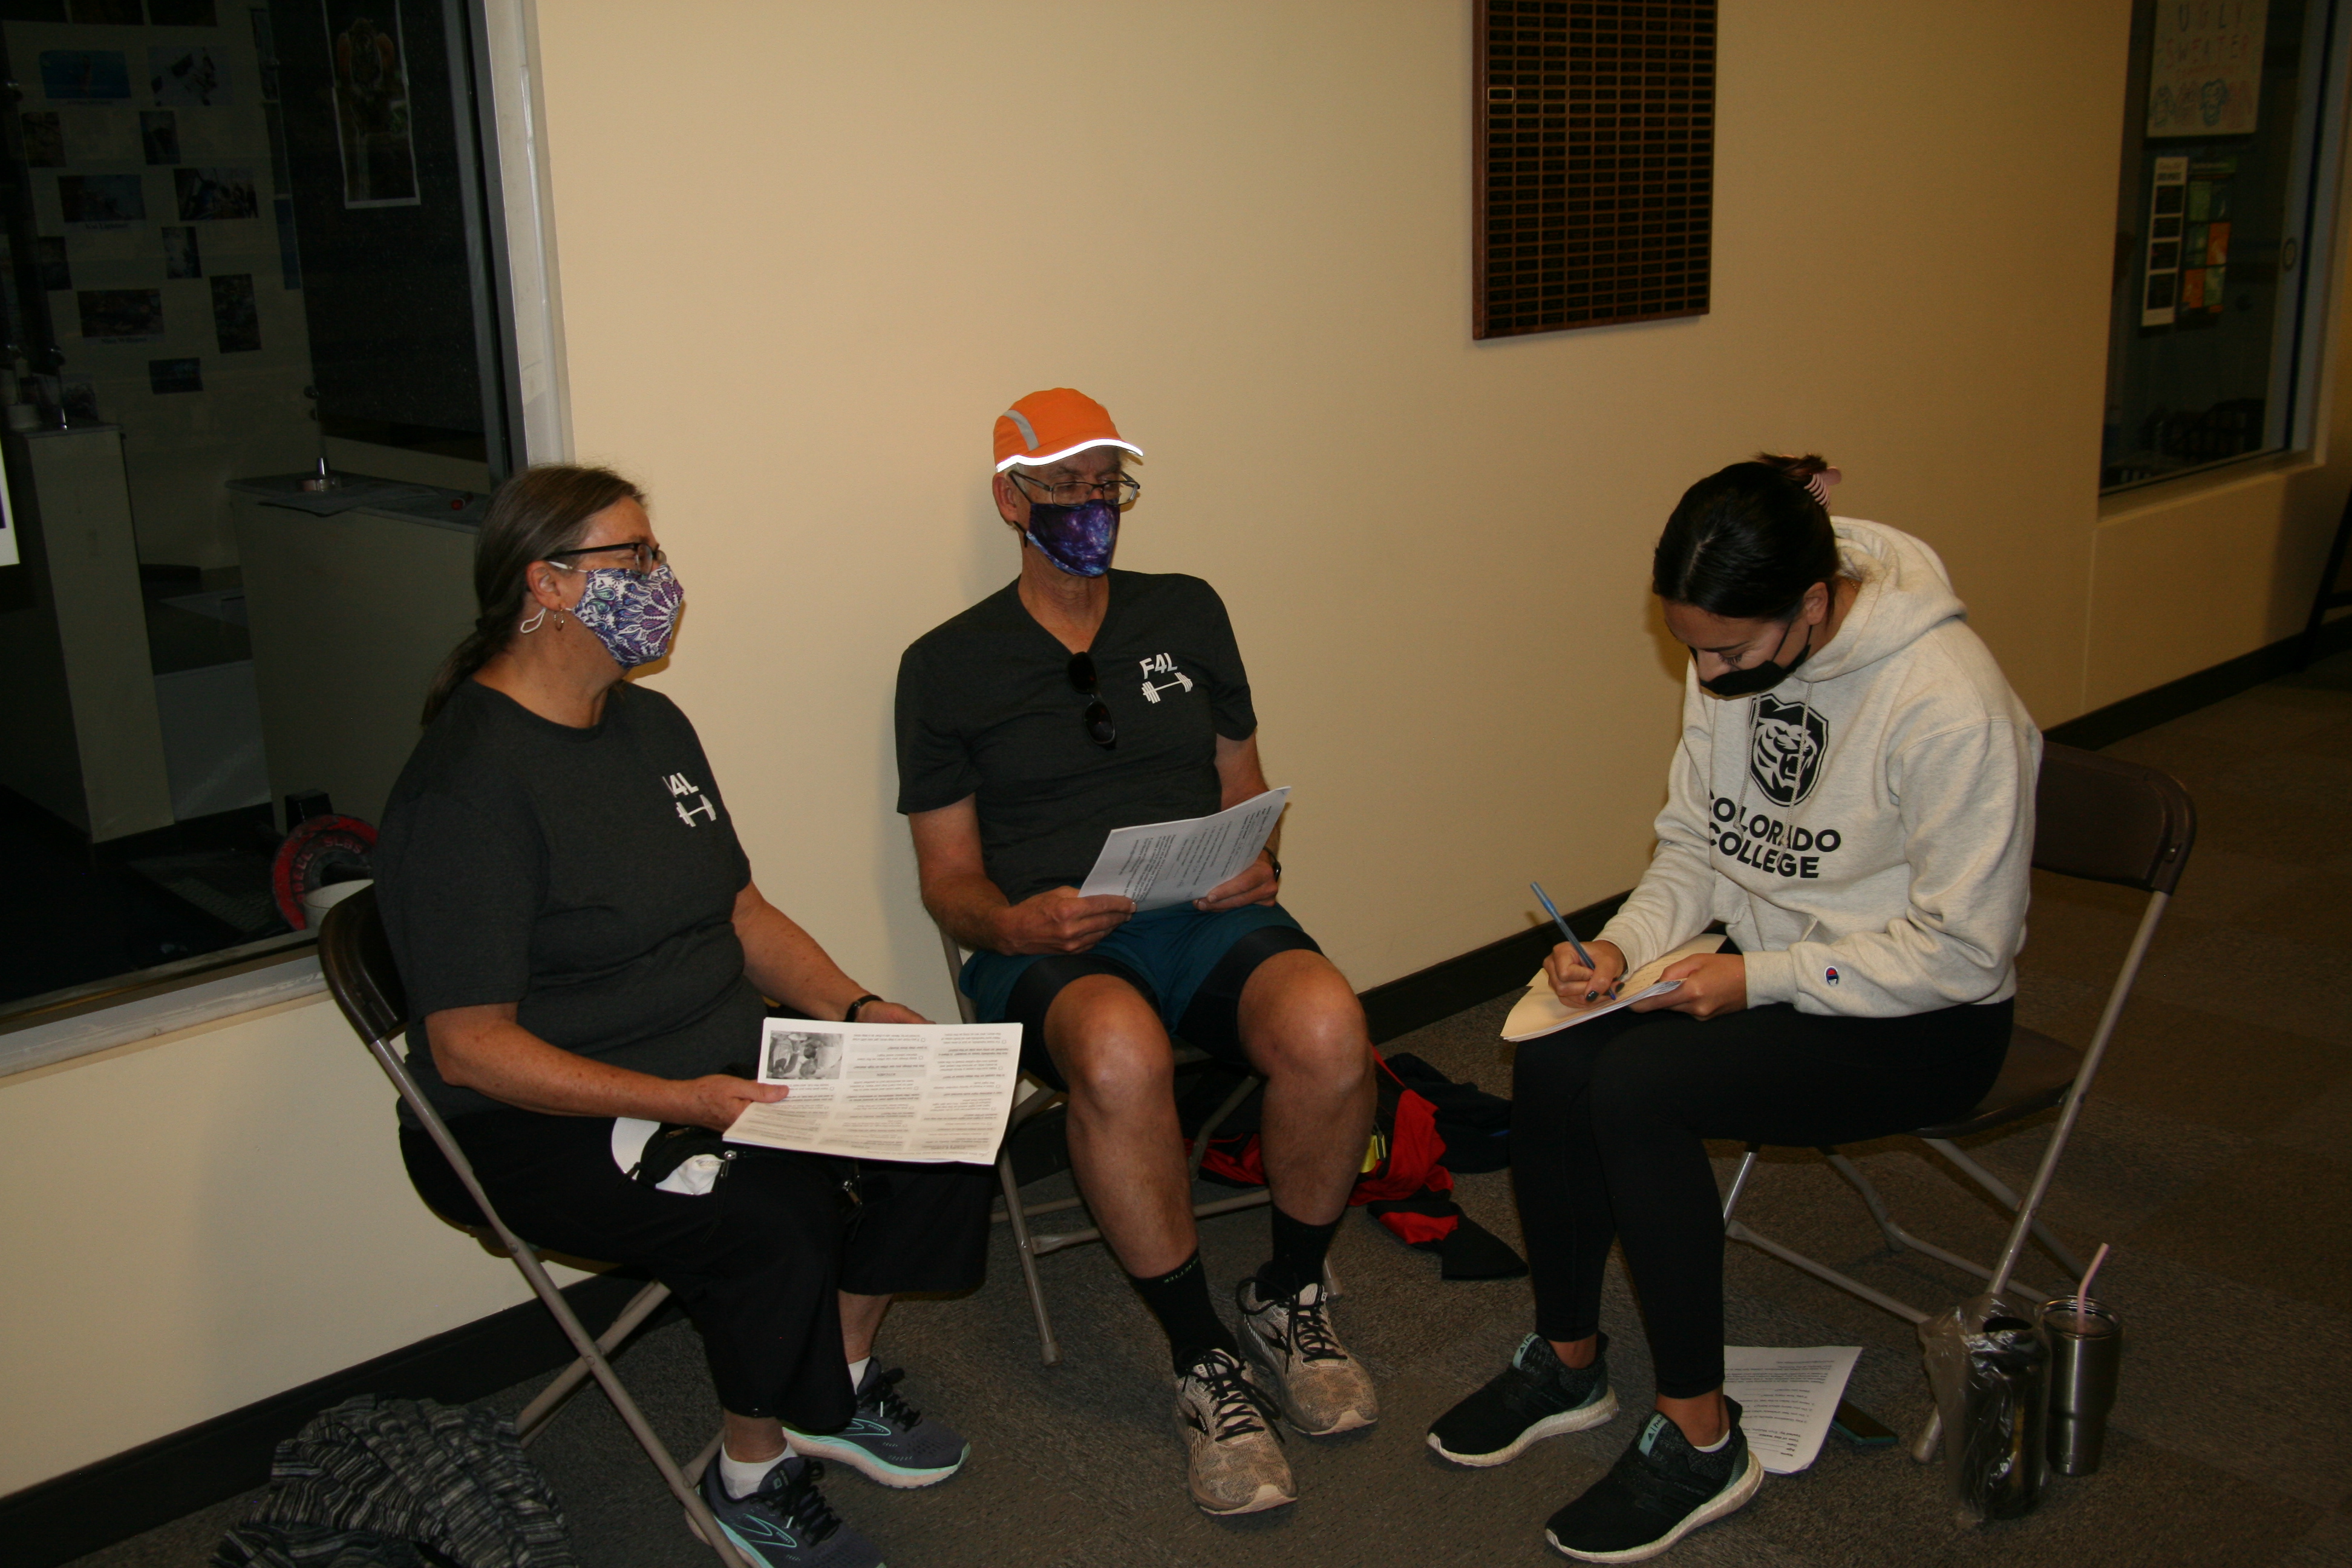 Fit 4 Life participants during a fitness consultation <span class="cc-gallery-credit"></span>